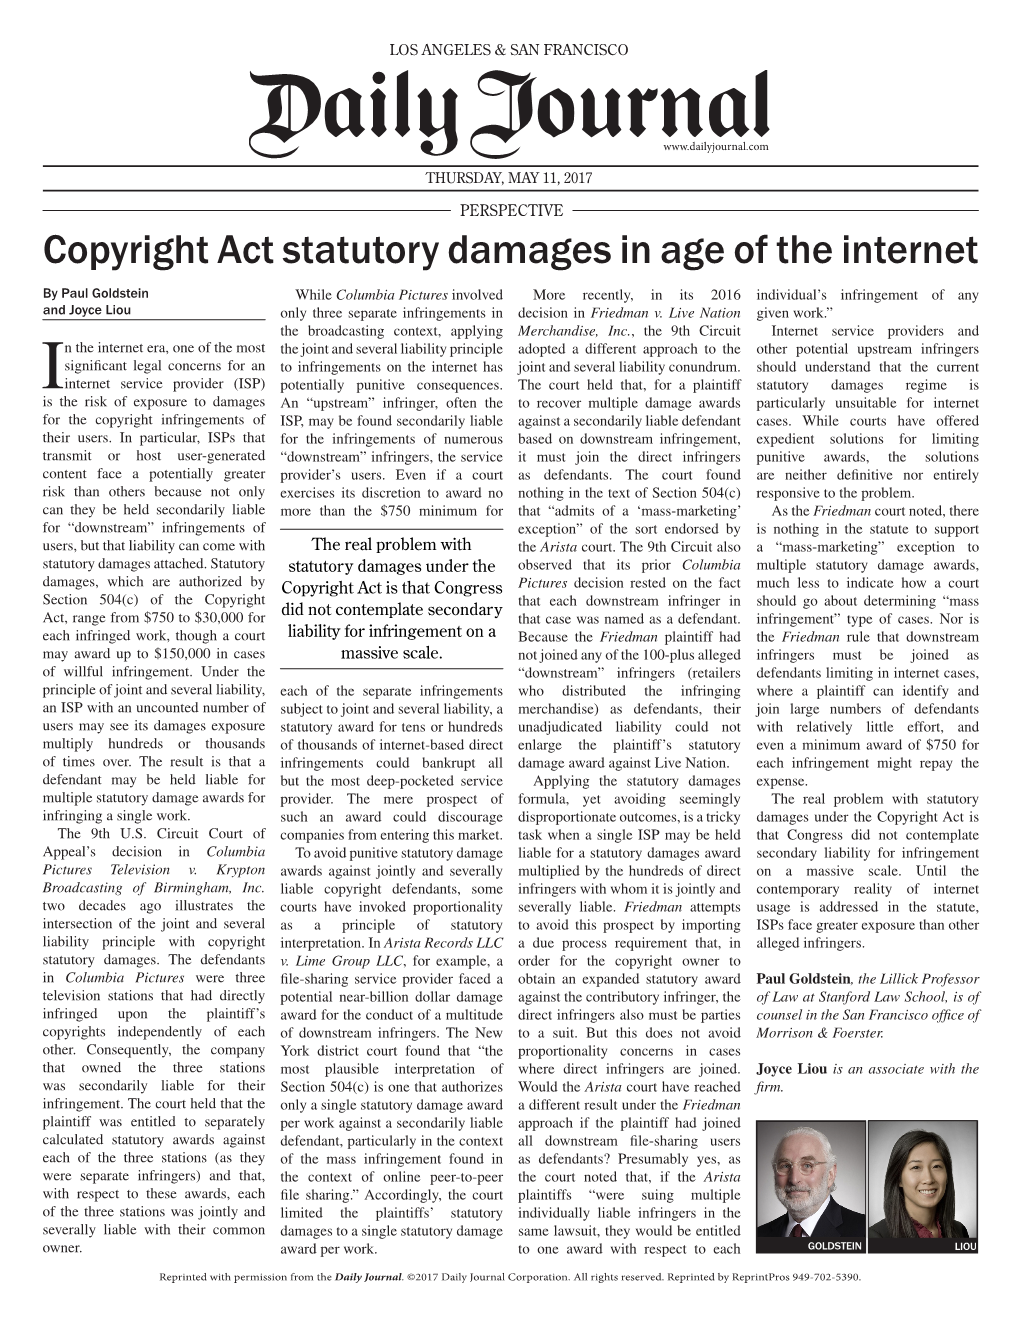 Copyright Act Statutory Damages in Age of the Internet